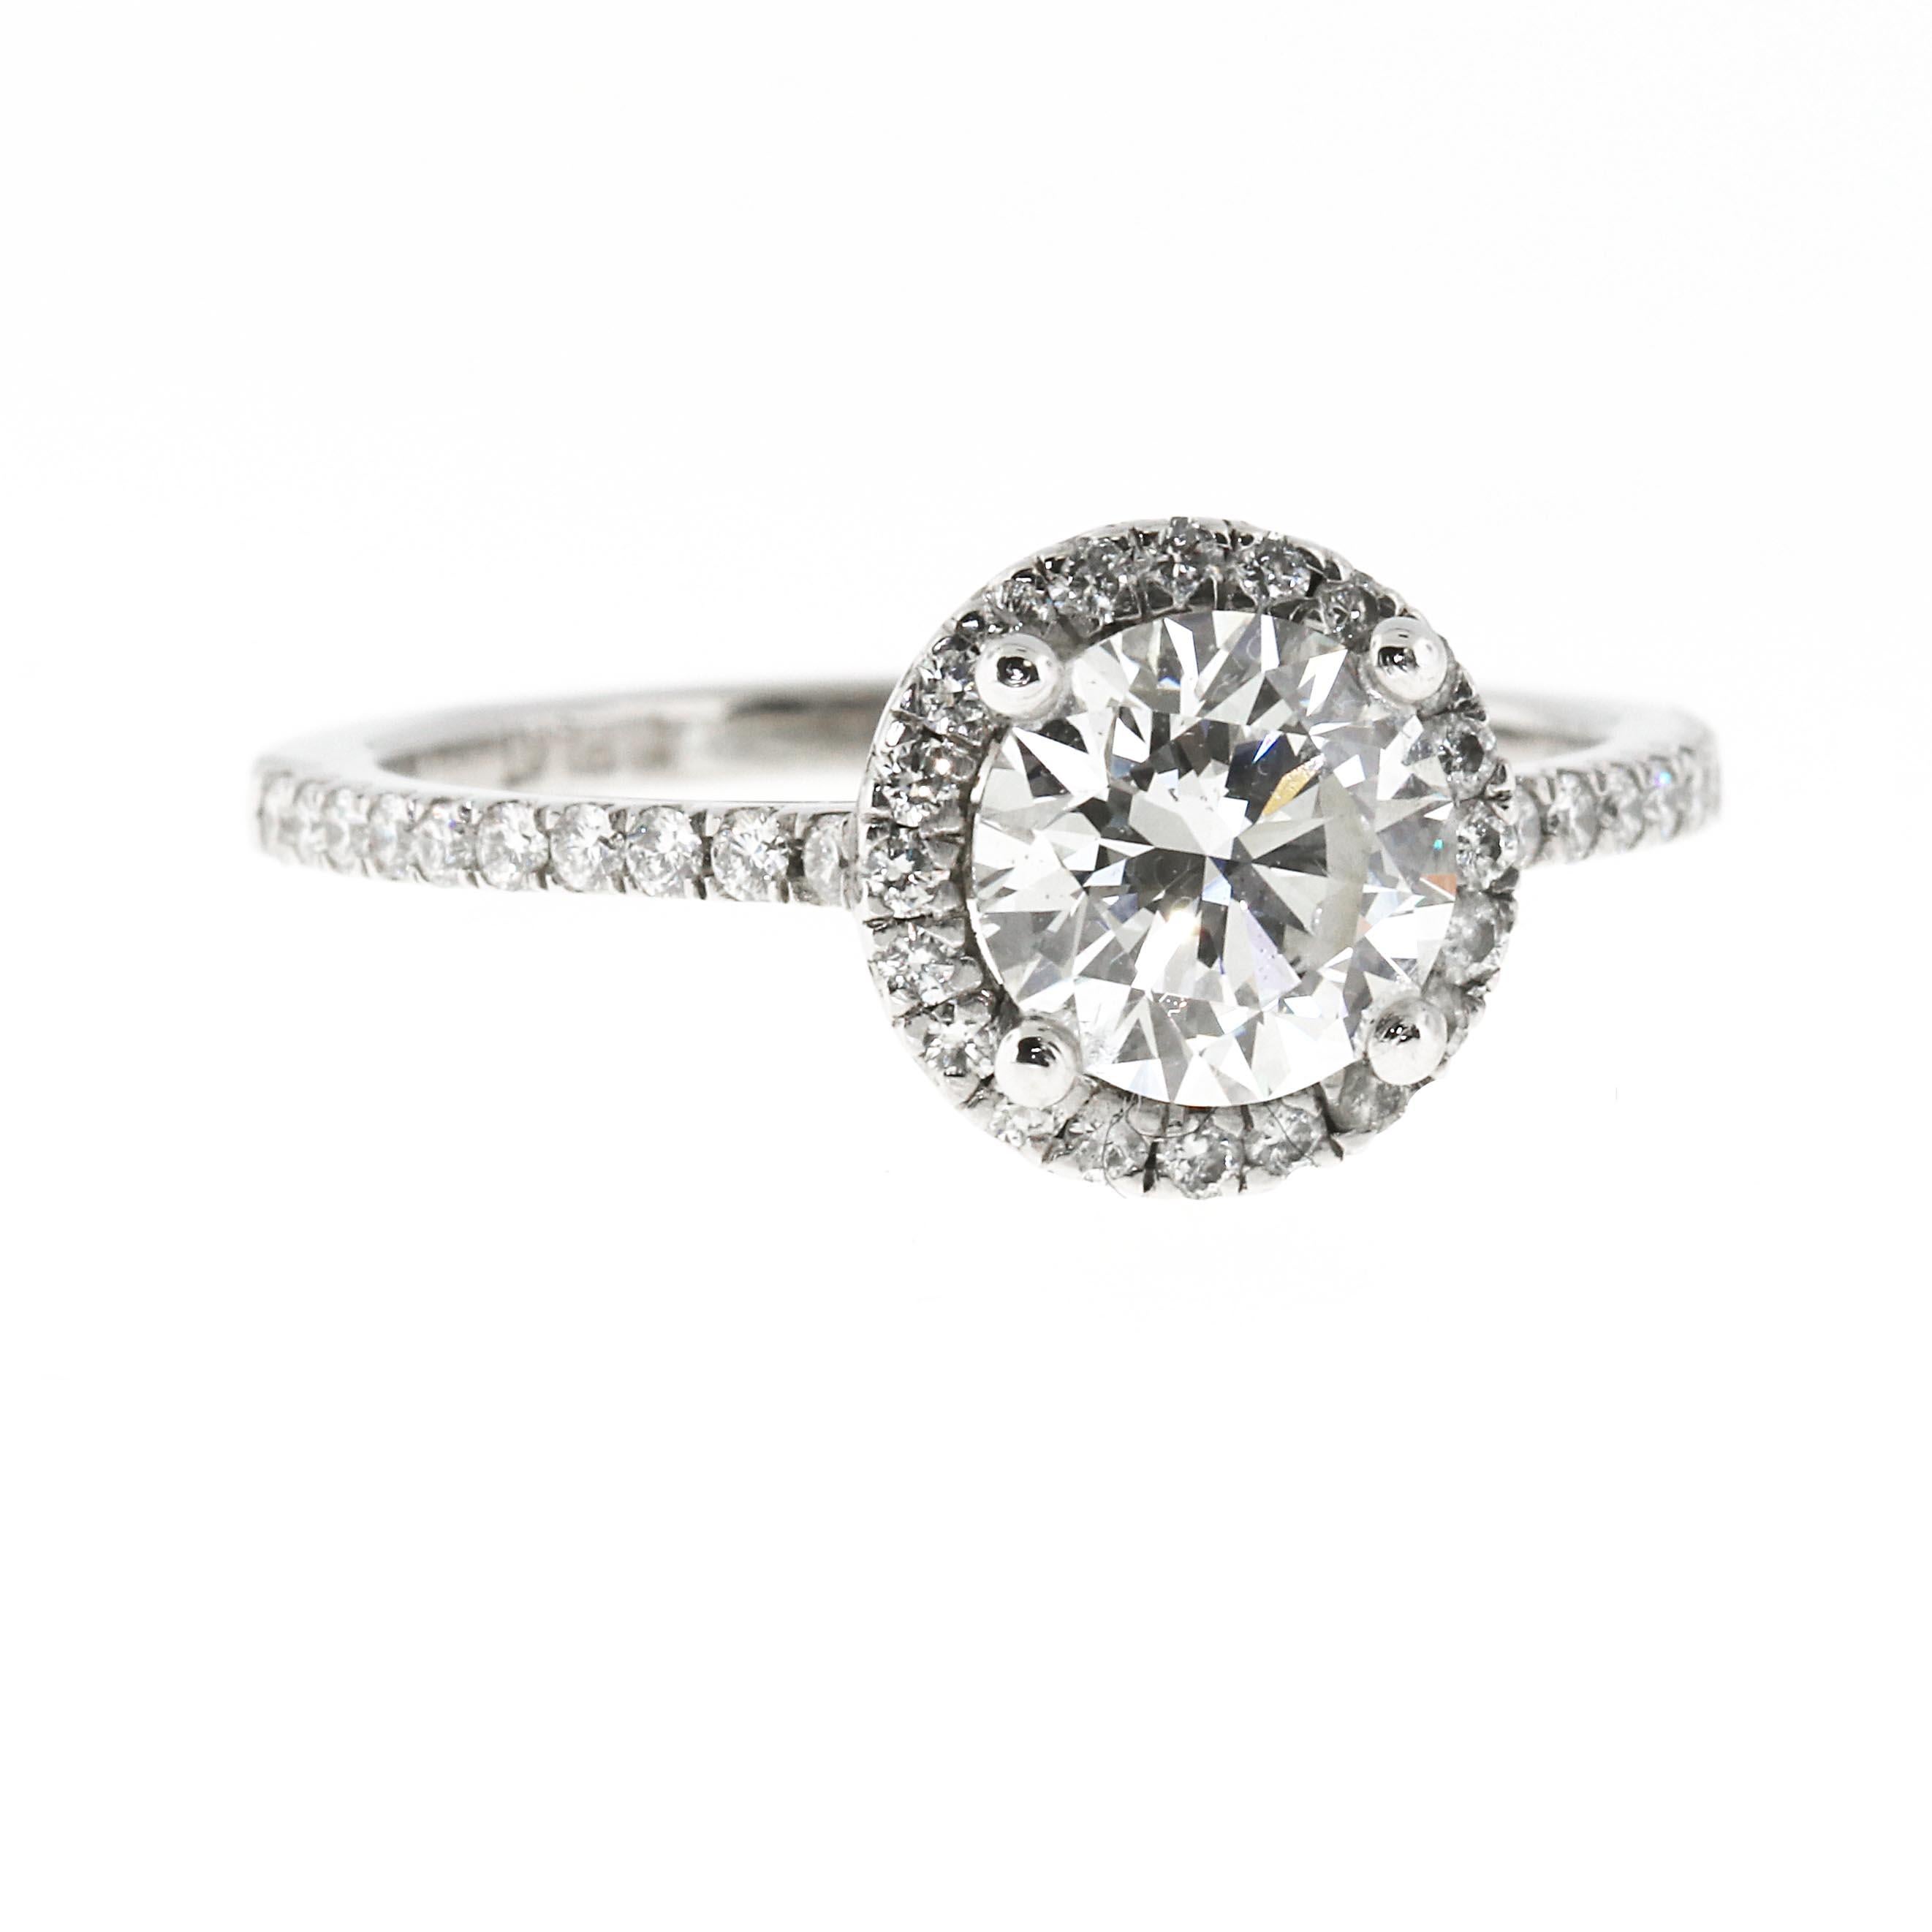 A spectacular 1.02 E-VS2 Round diamond engagement ring. This diamond has all the right proportions. It is triple excellent which means the cut, the polish and the symmetry are all excellent. There is no better looking 1.02 E-VS2 available. The stone